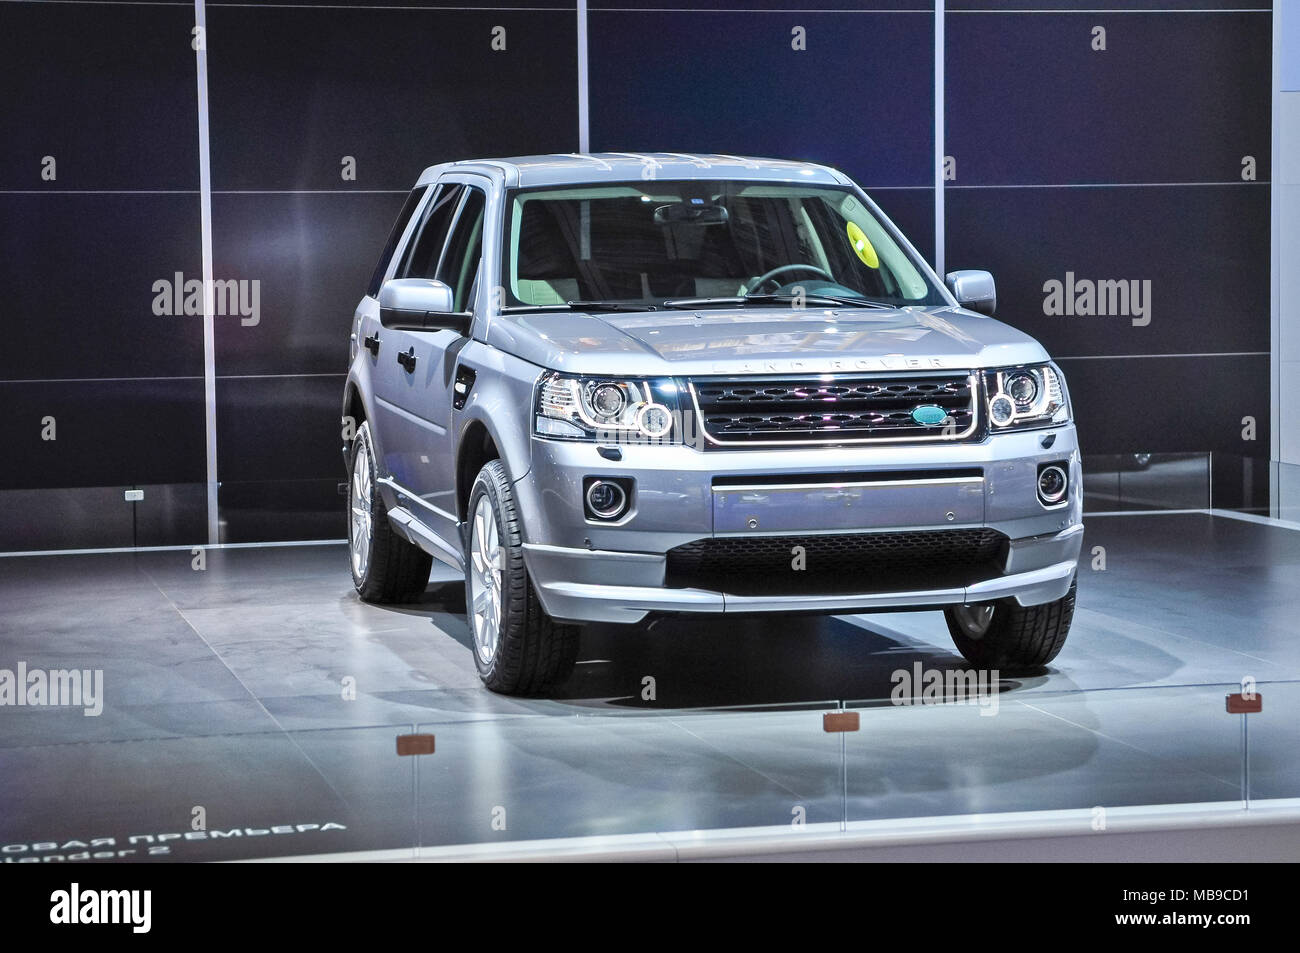 Russia, Moscow, Expocentre, 29 August - 9 September 2012: Land Rover Freelander 2 world premier at 4th Moscow International Automobile Salon (MIAS 201 Stock Photo